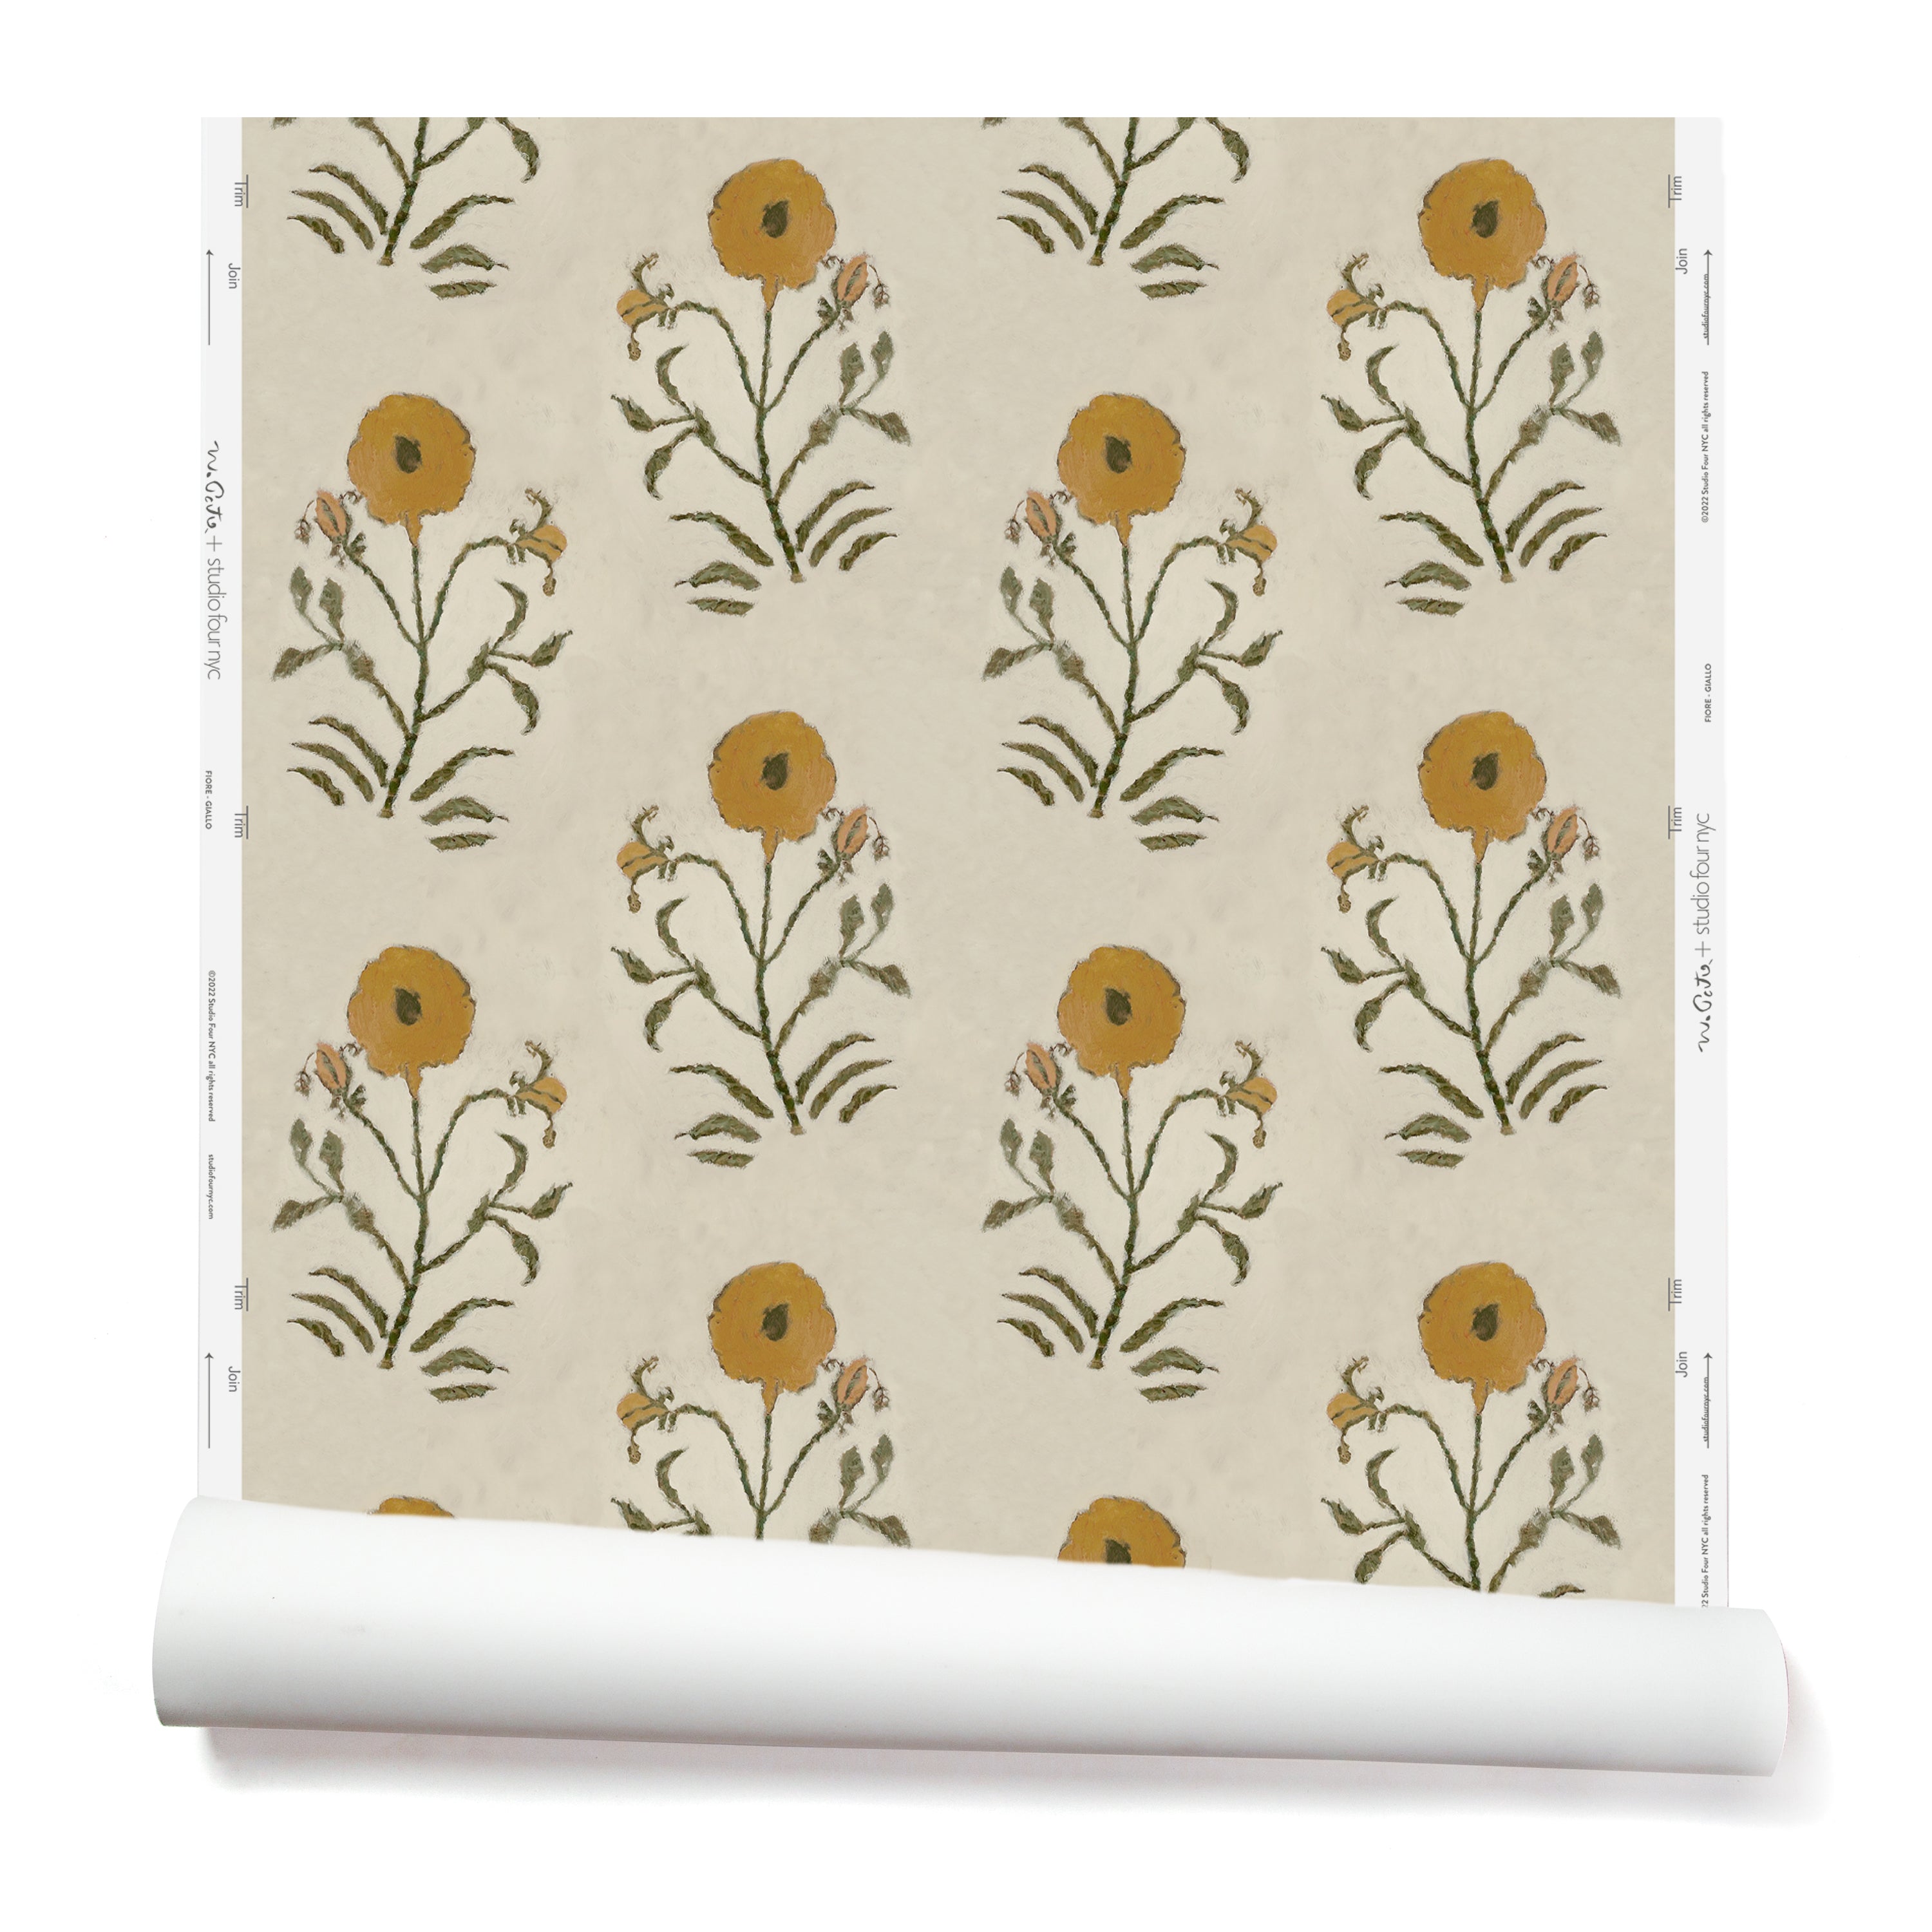 Partially unrolled wallpaper in a large-scale painterly floral print in mustard and green on a cream field.